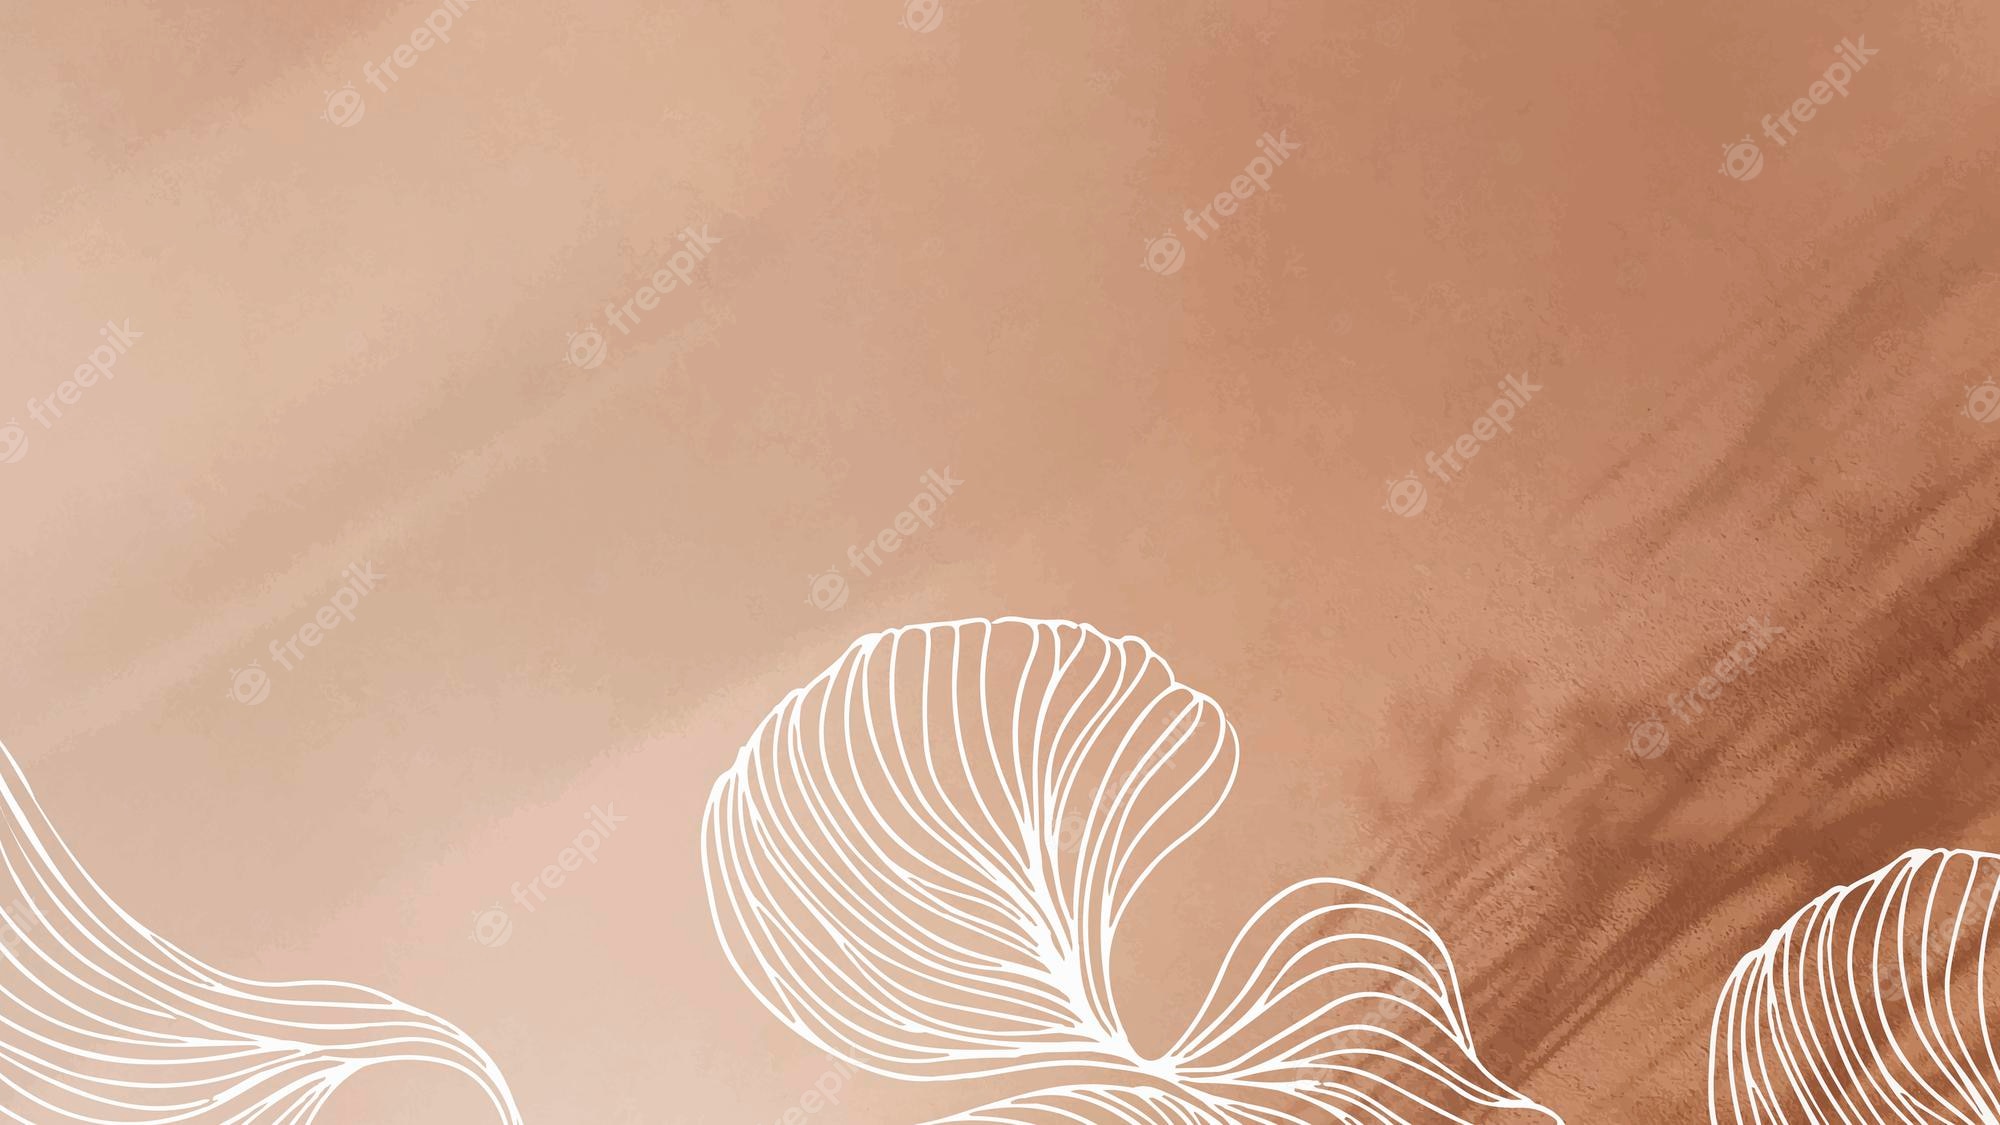 A white and brown background with leaves - Light brown